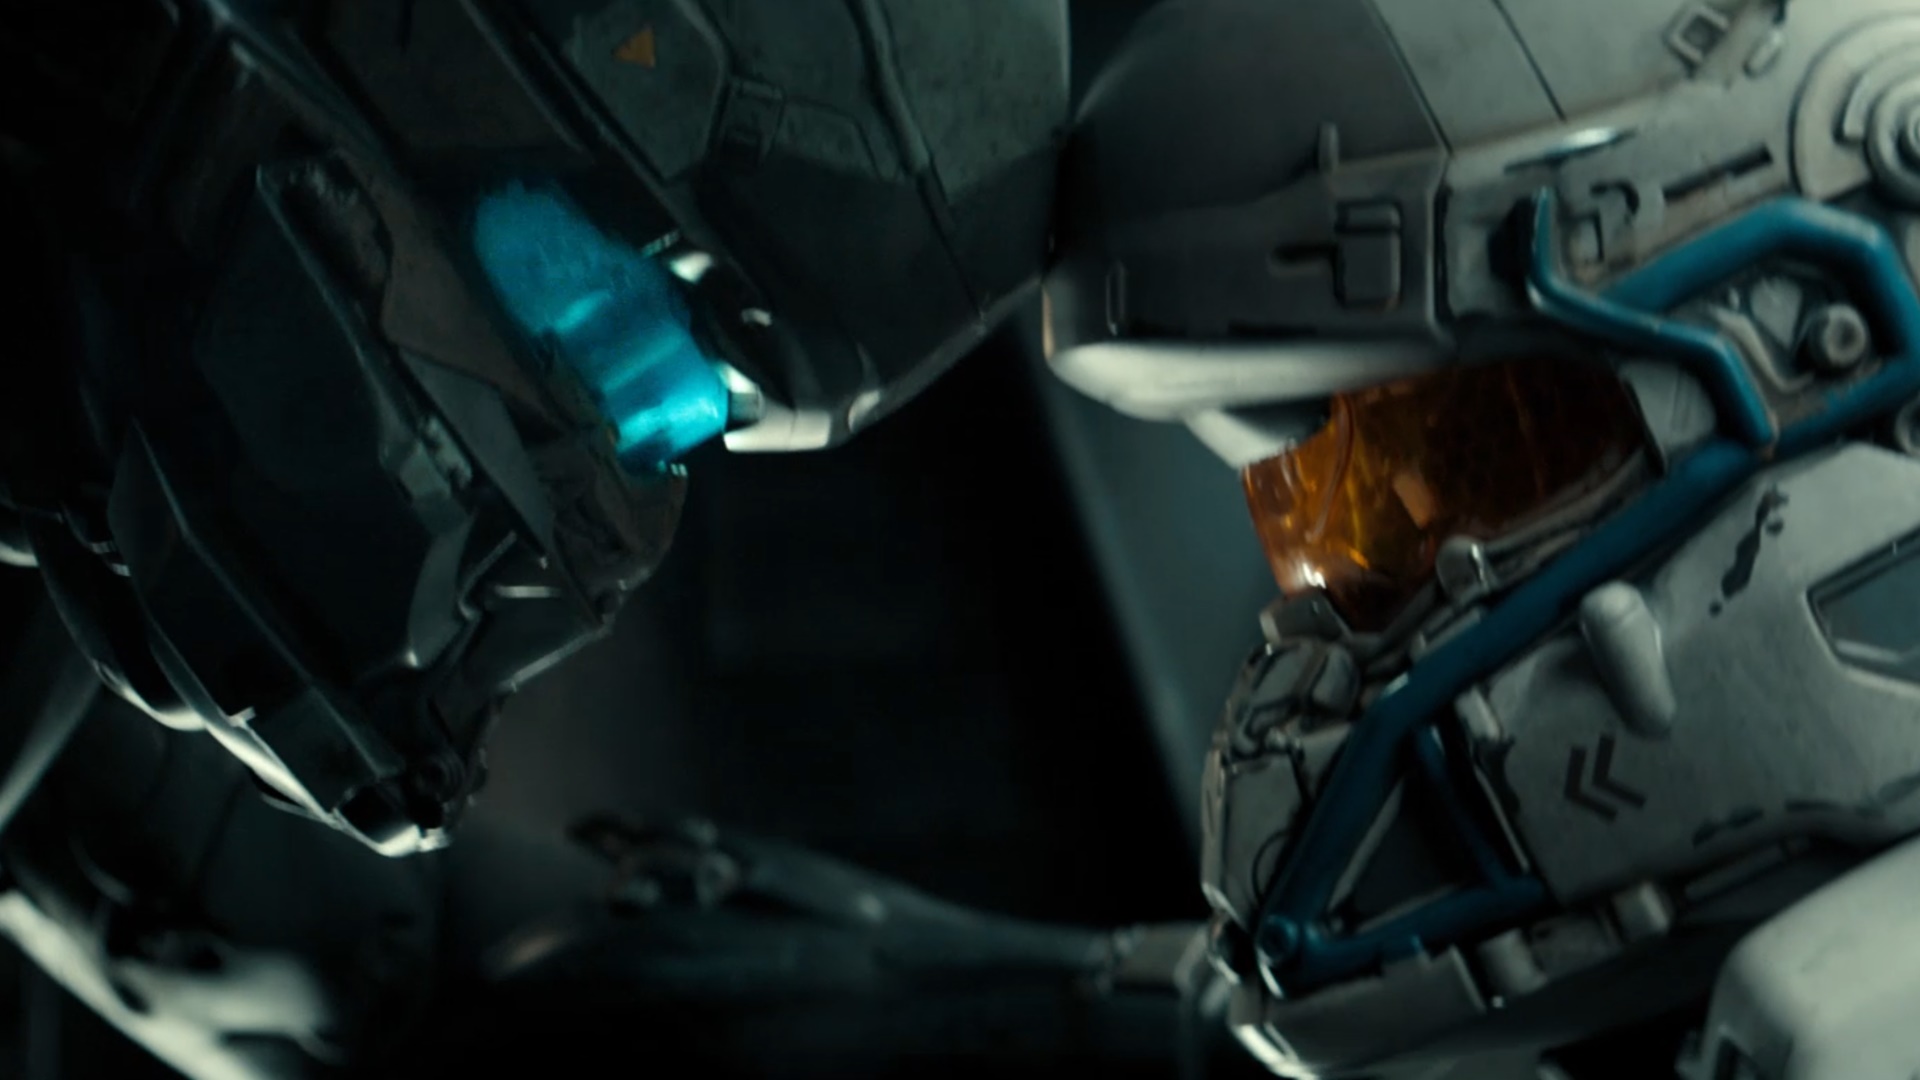 Trailer still of the Halo 5 ad "The Hunt Begins" showing Jameson Locke bumping helmets with Holly Tanaka